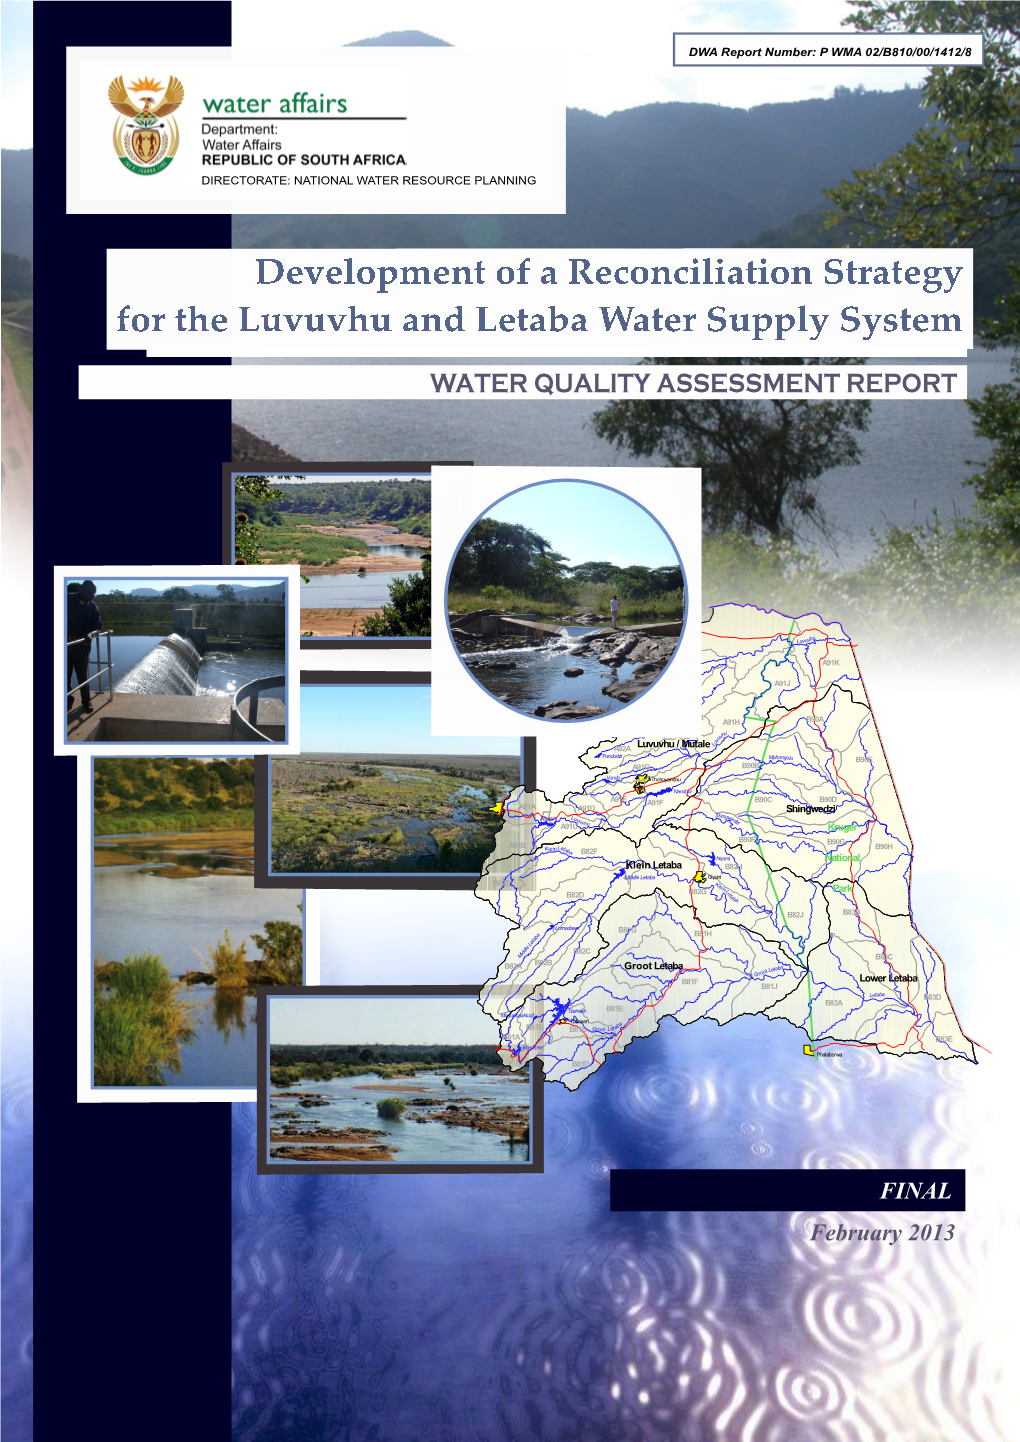 Development of a Reconciliation Strategy for the Luvuvhu and Letaba Water Supply System WATER QUALITY ASSESSMENT REPORT